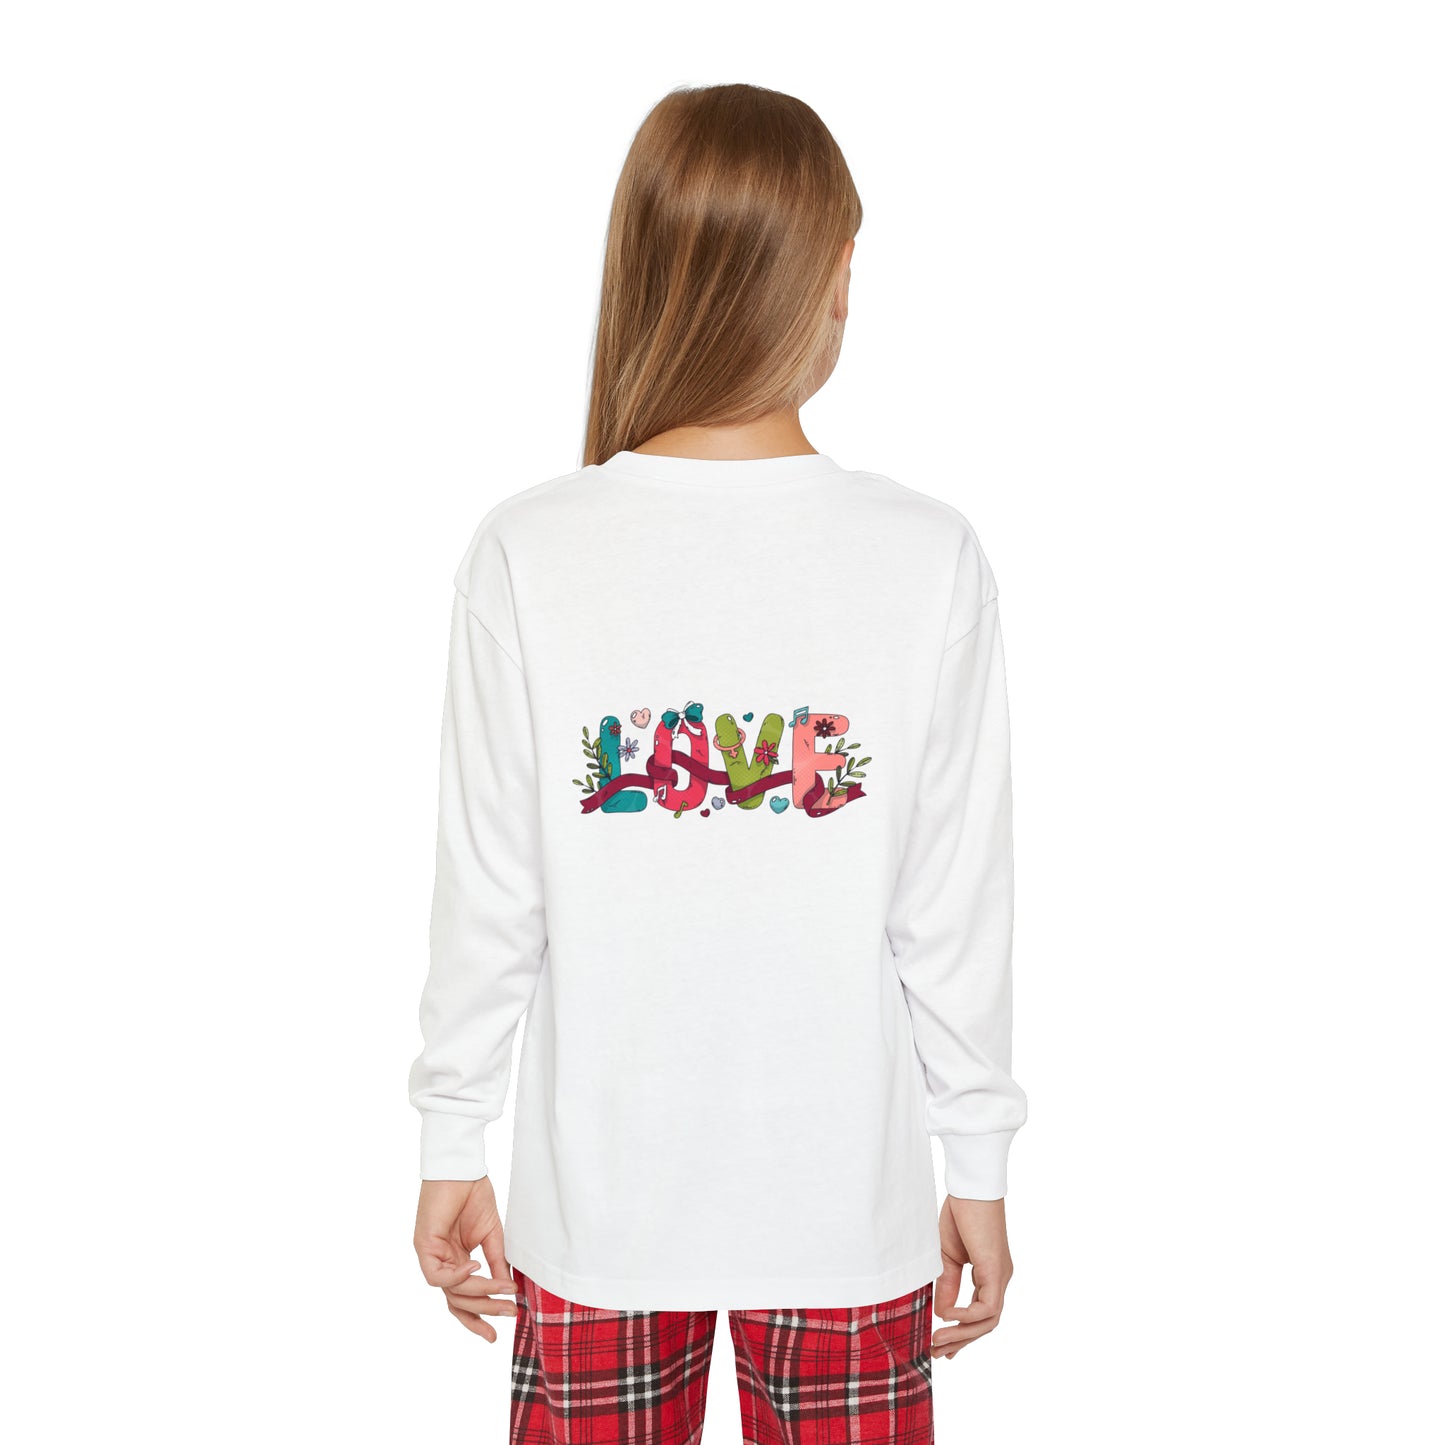 Niccie's Cute Love Youth Long Sleeve Holiday Outfit Set